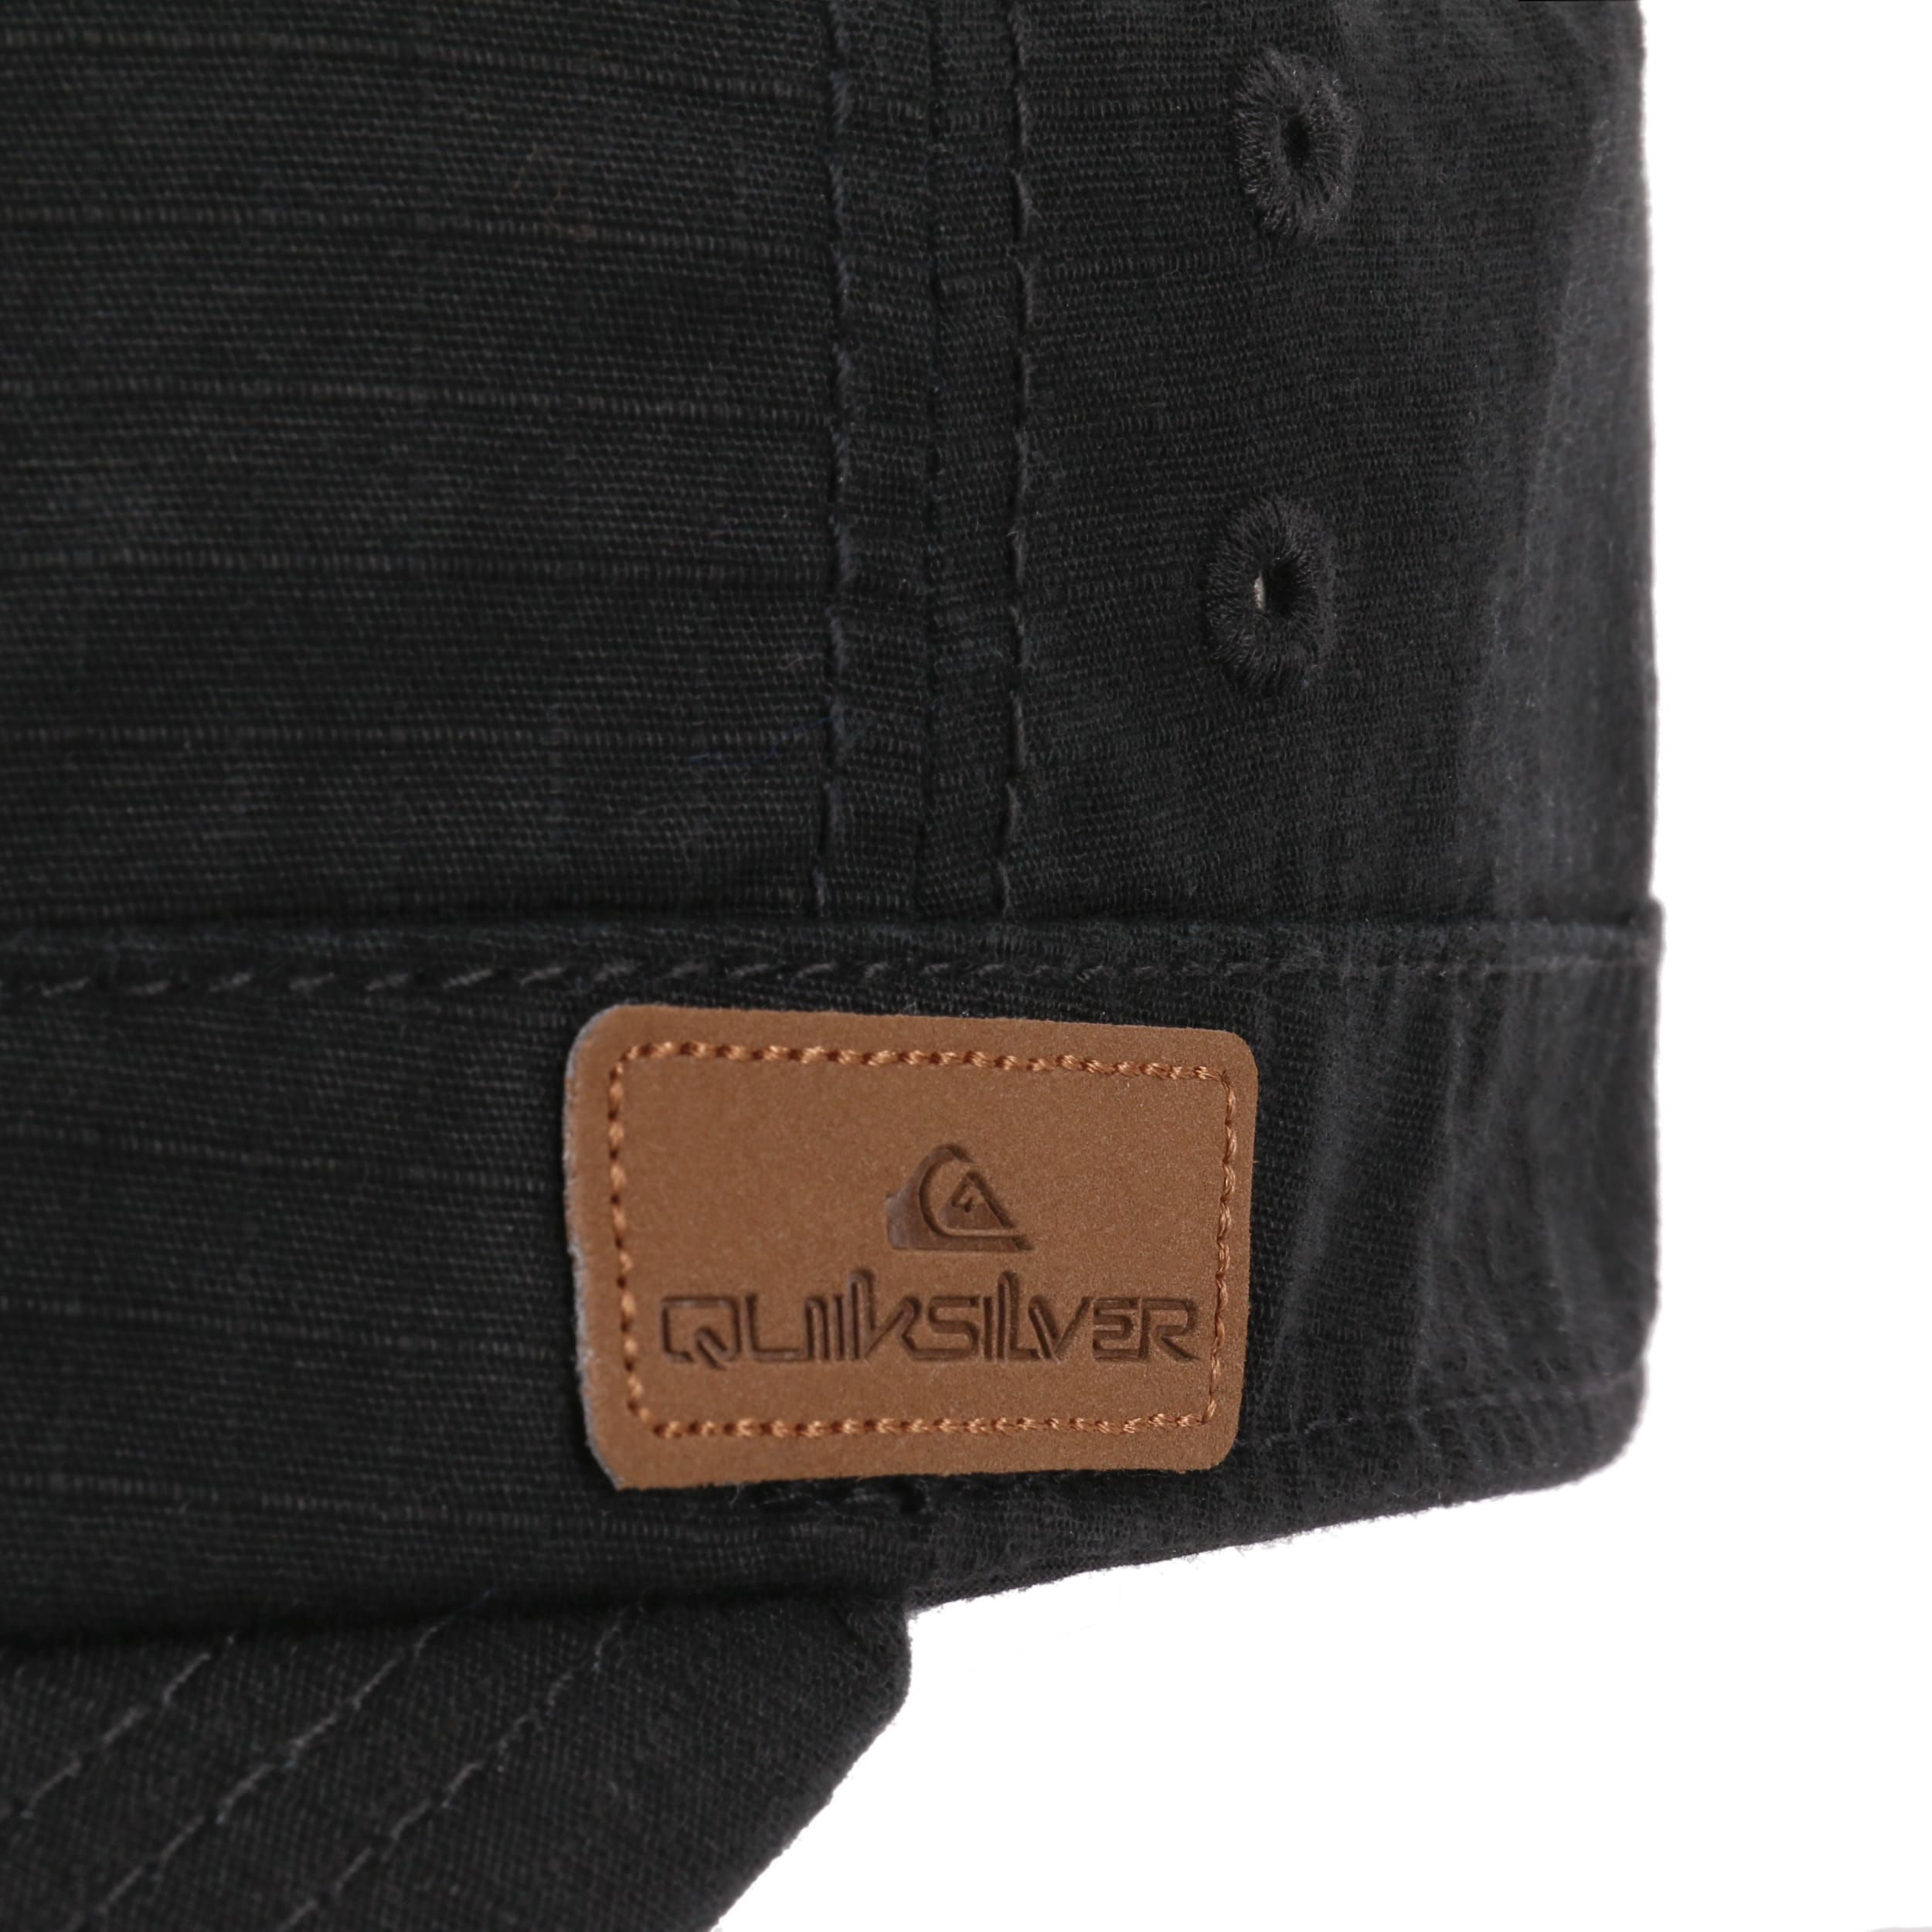 32,95 Cap - Army Quiksilver € Renegade 2 by